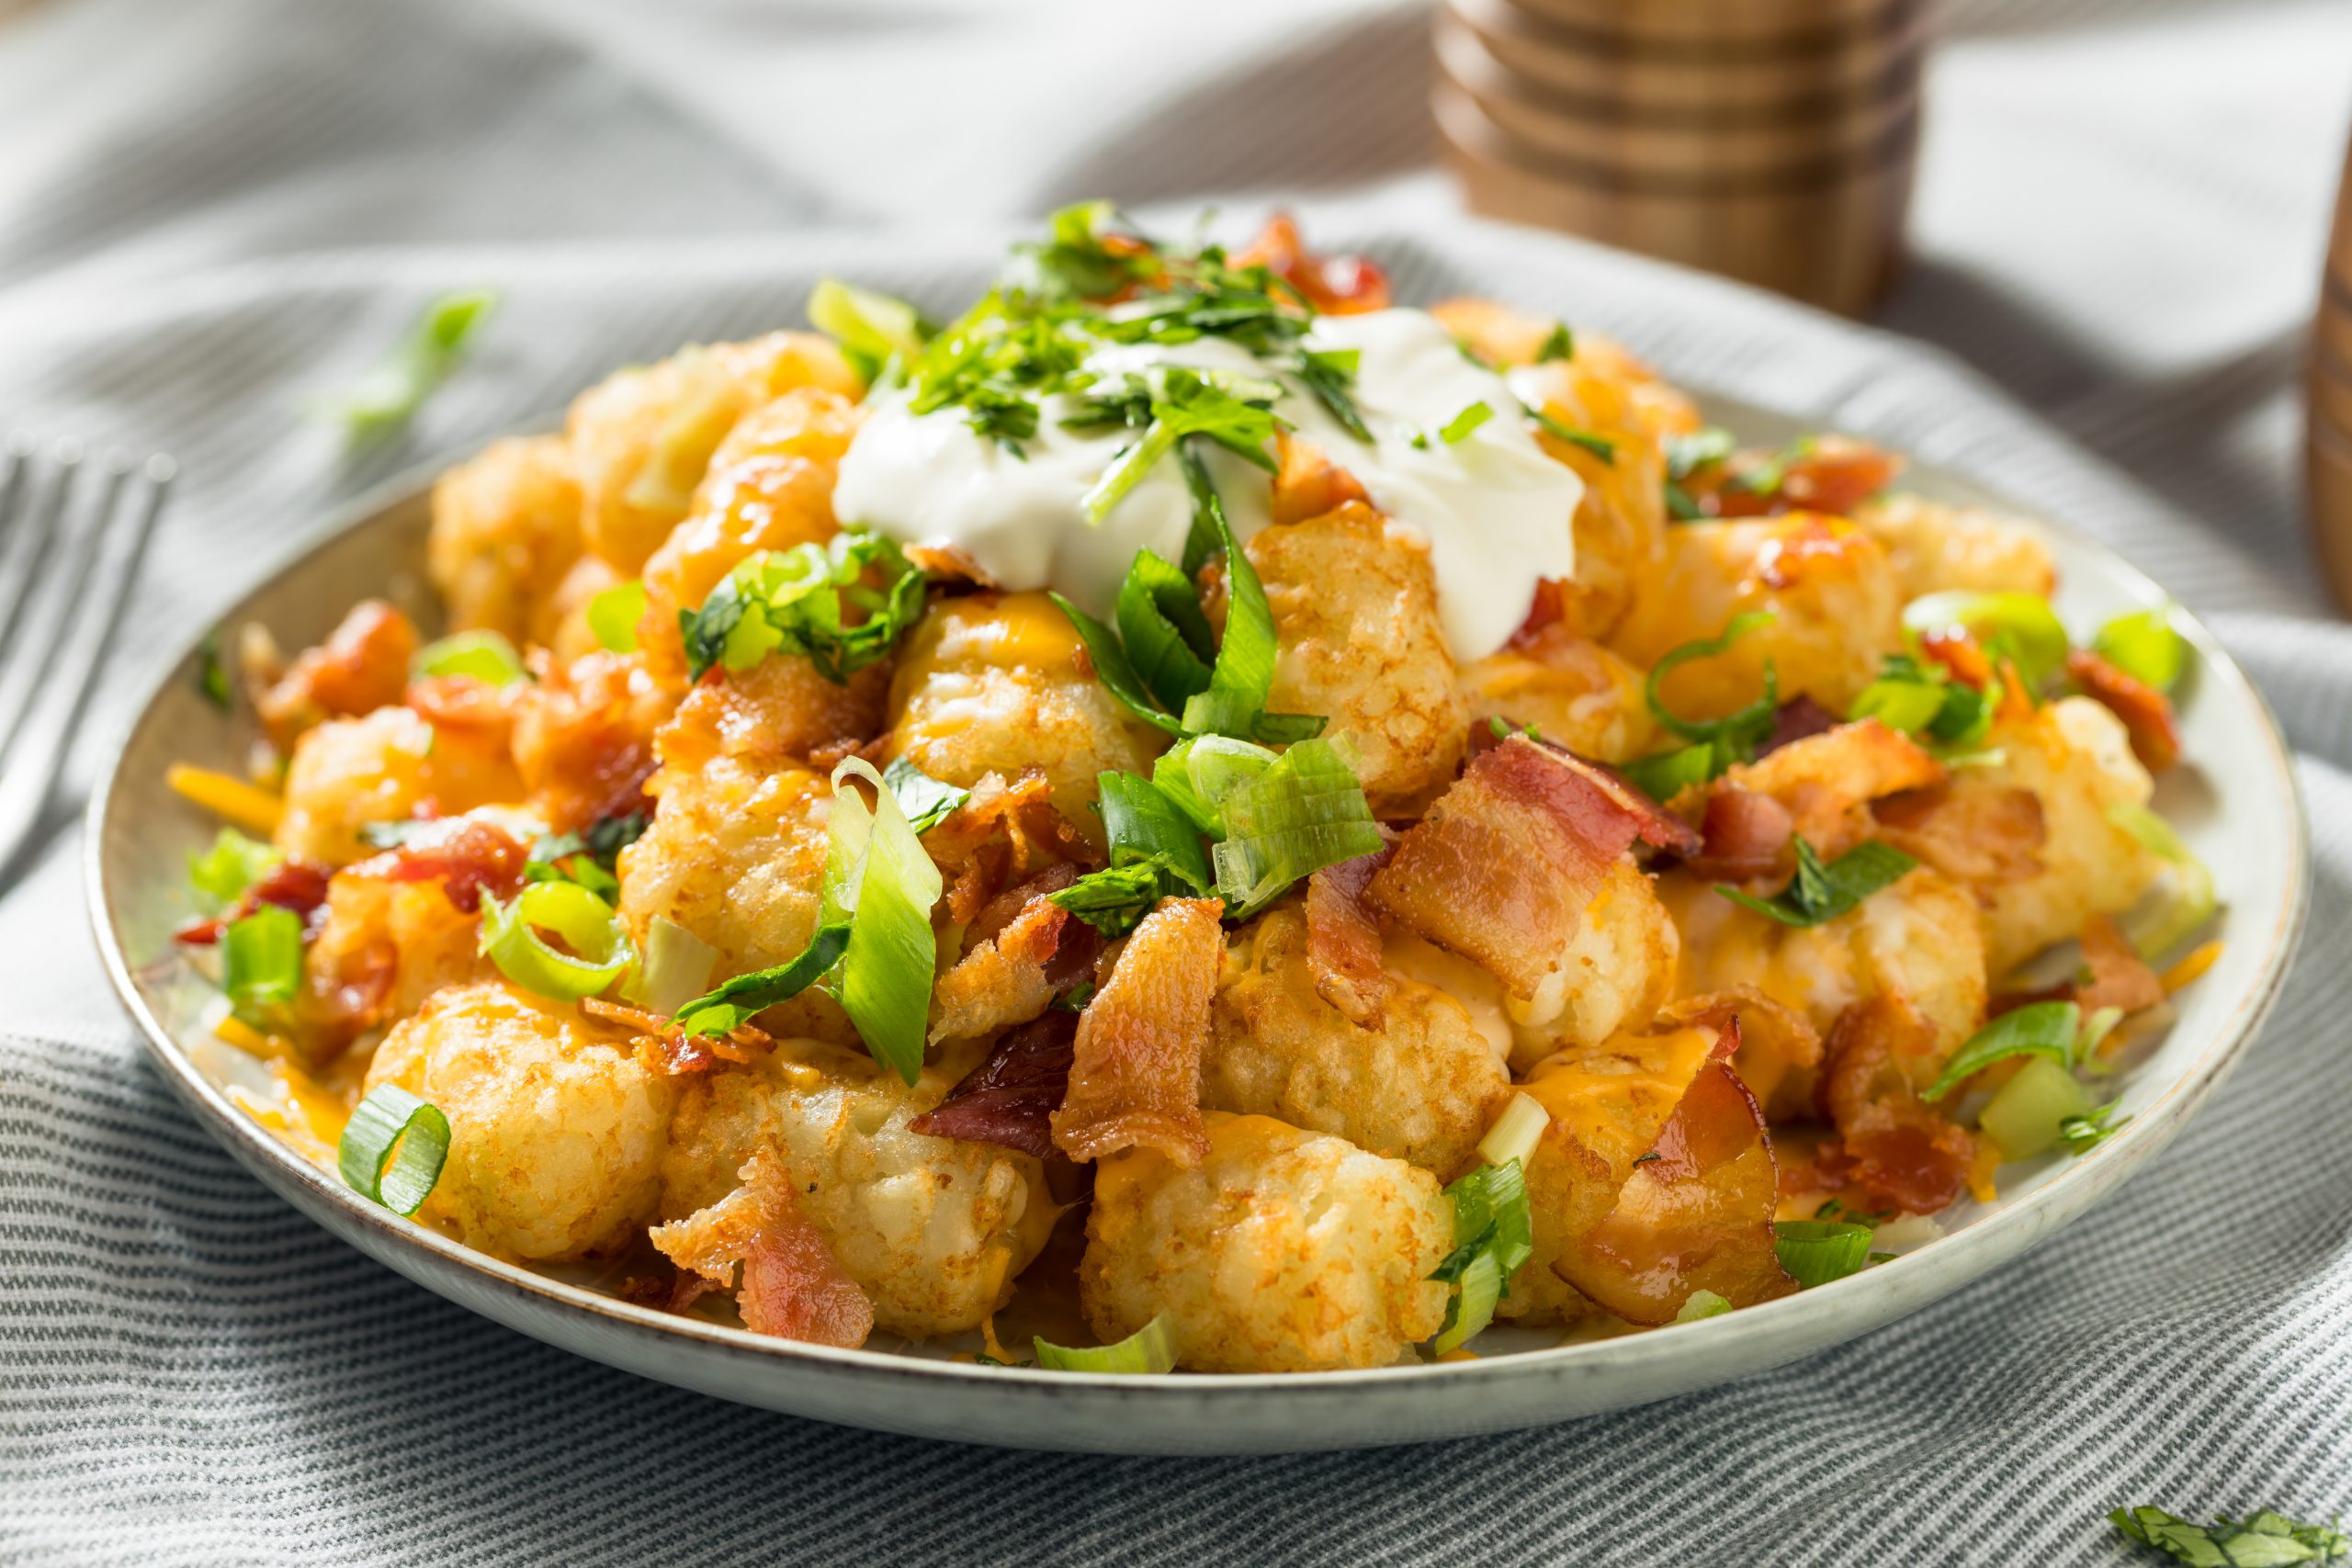 spicy-homemade-loaded-taters-tots-9ATK87Q.jpg